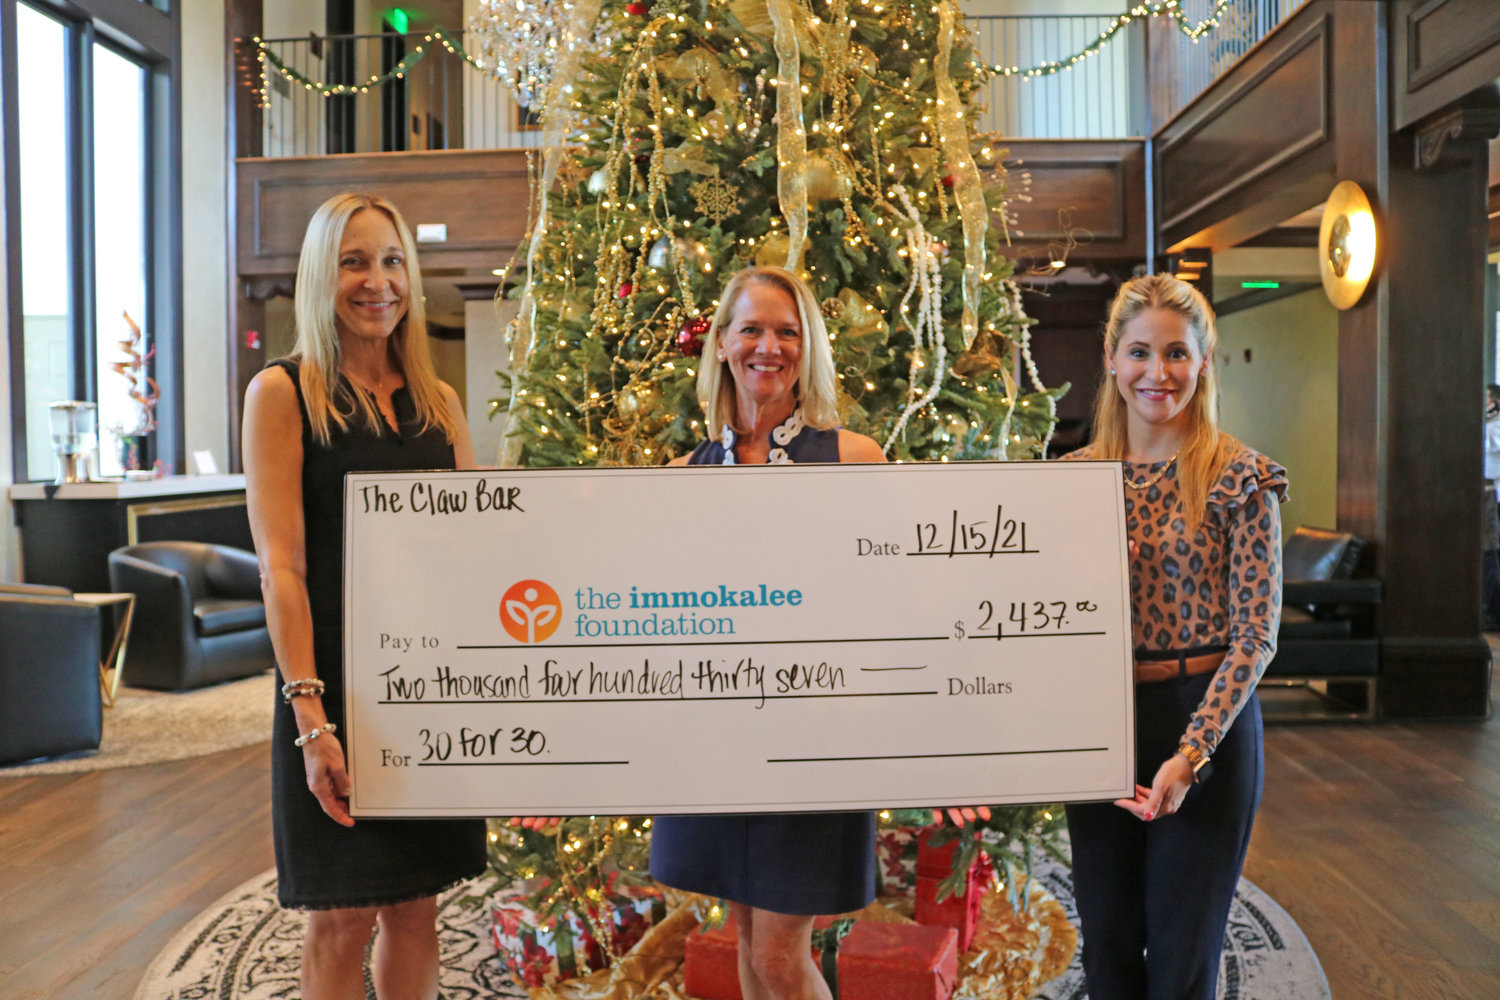 The Claw Bar’s Jeanne Tierney (left) and Megan Miller (center) present Marie Rubenstein (right), Director of Philanthropy at The Immokalee Foundation, a check for nearly $2,500 raised during the 30 for 30 Event.